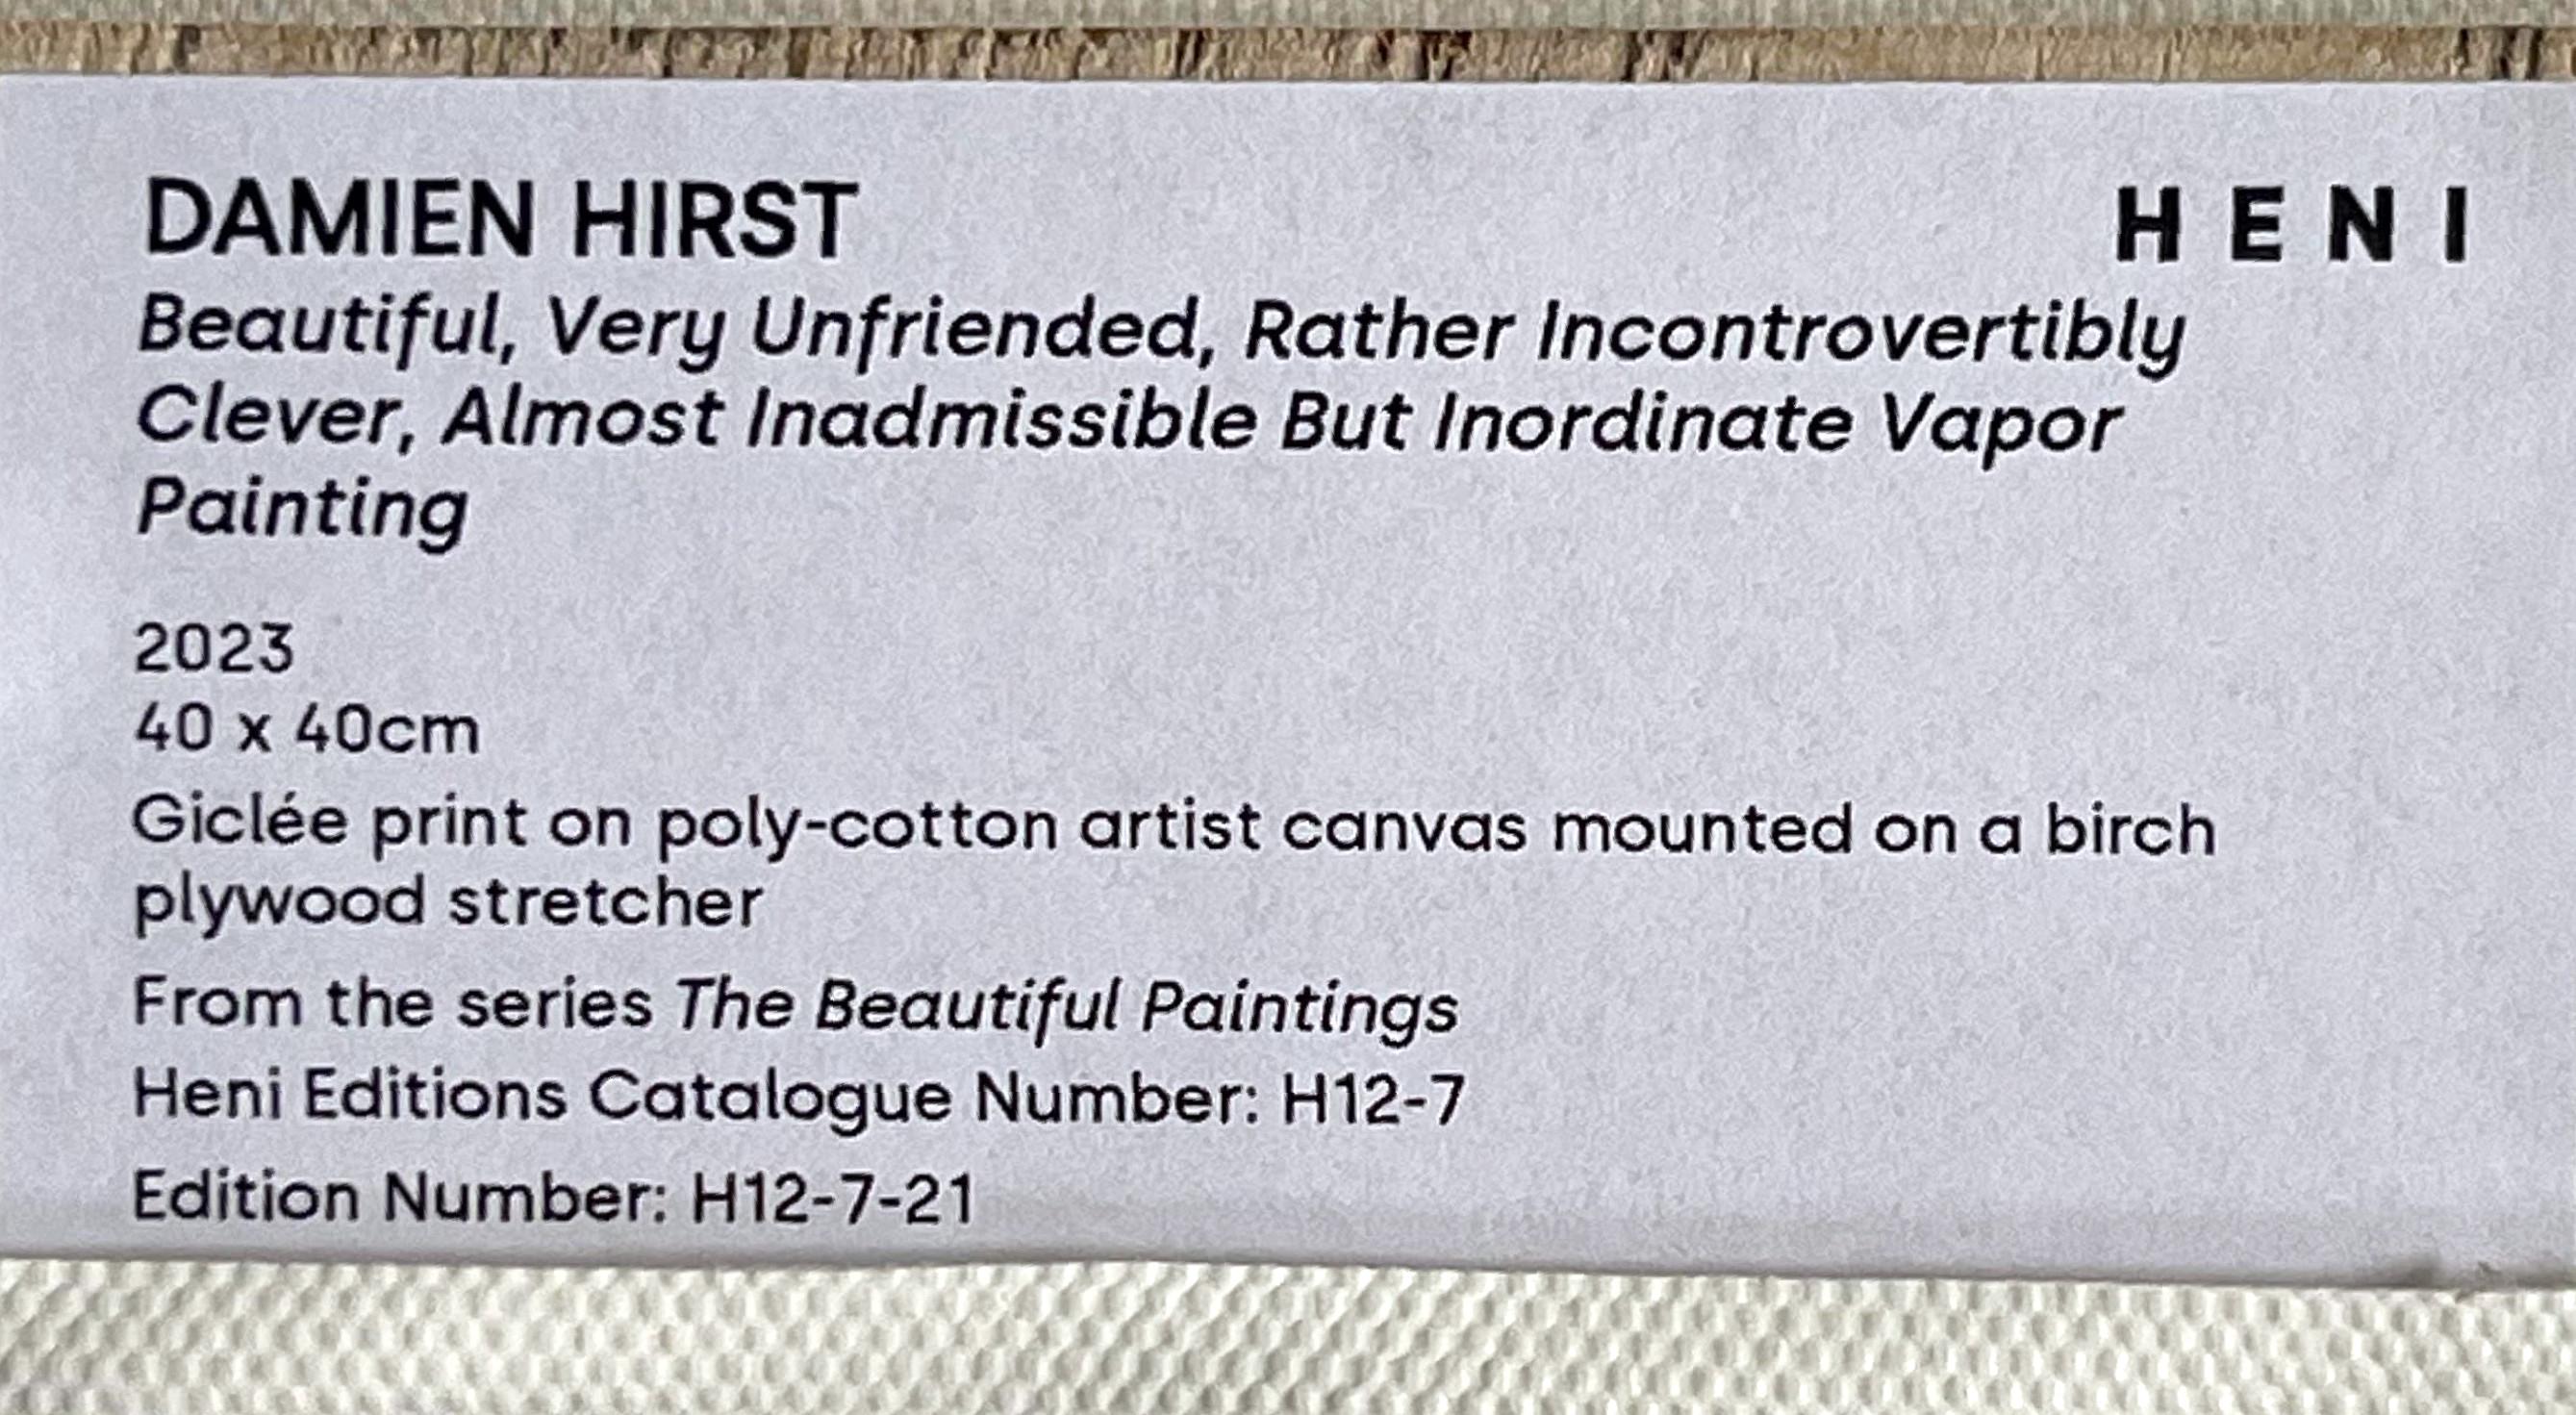 Damien Hirst
Beautiful, Very Unfriended, Rather Incontrovertibly Clever, Almost Inadmissible But Inordinate Vapor Painting, 2023
Mixed Media Giclée print on poly-cotton artist canvas mounted on a birch plywood stretcher
Hand signed with a paint pen